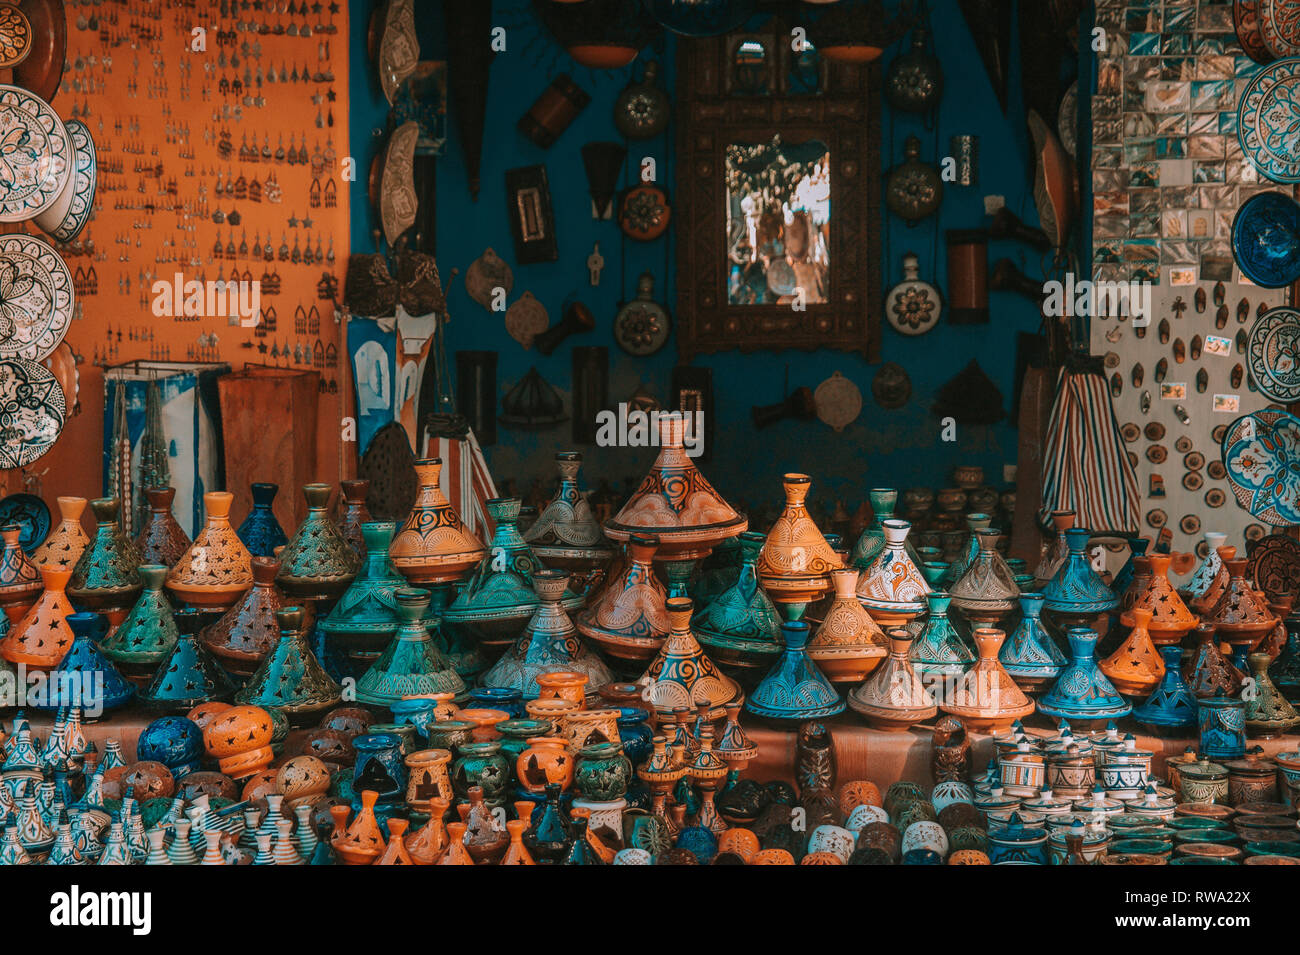 Traditional souvenir shop with craft objects displayed in blue city Chefchaouen, Morocco. Stock Photo